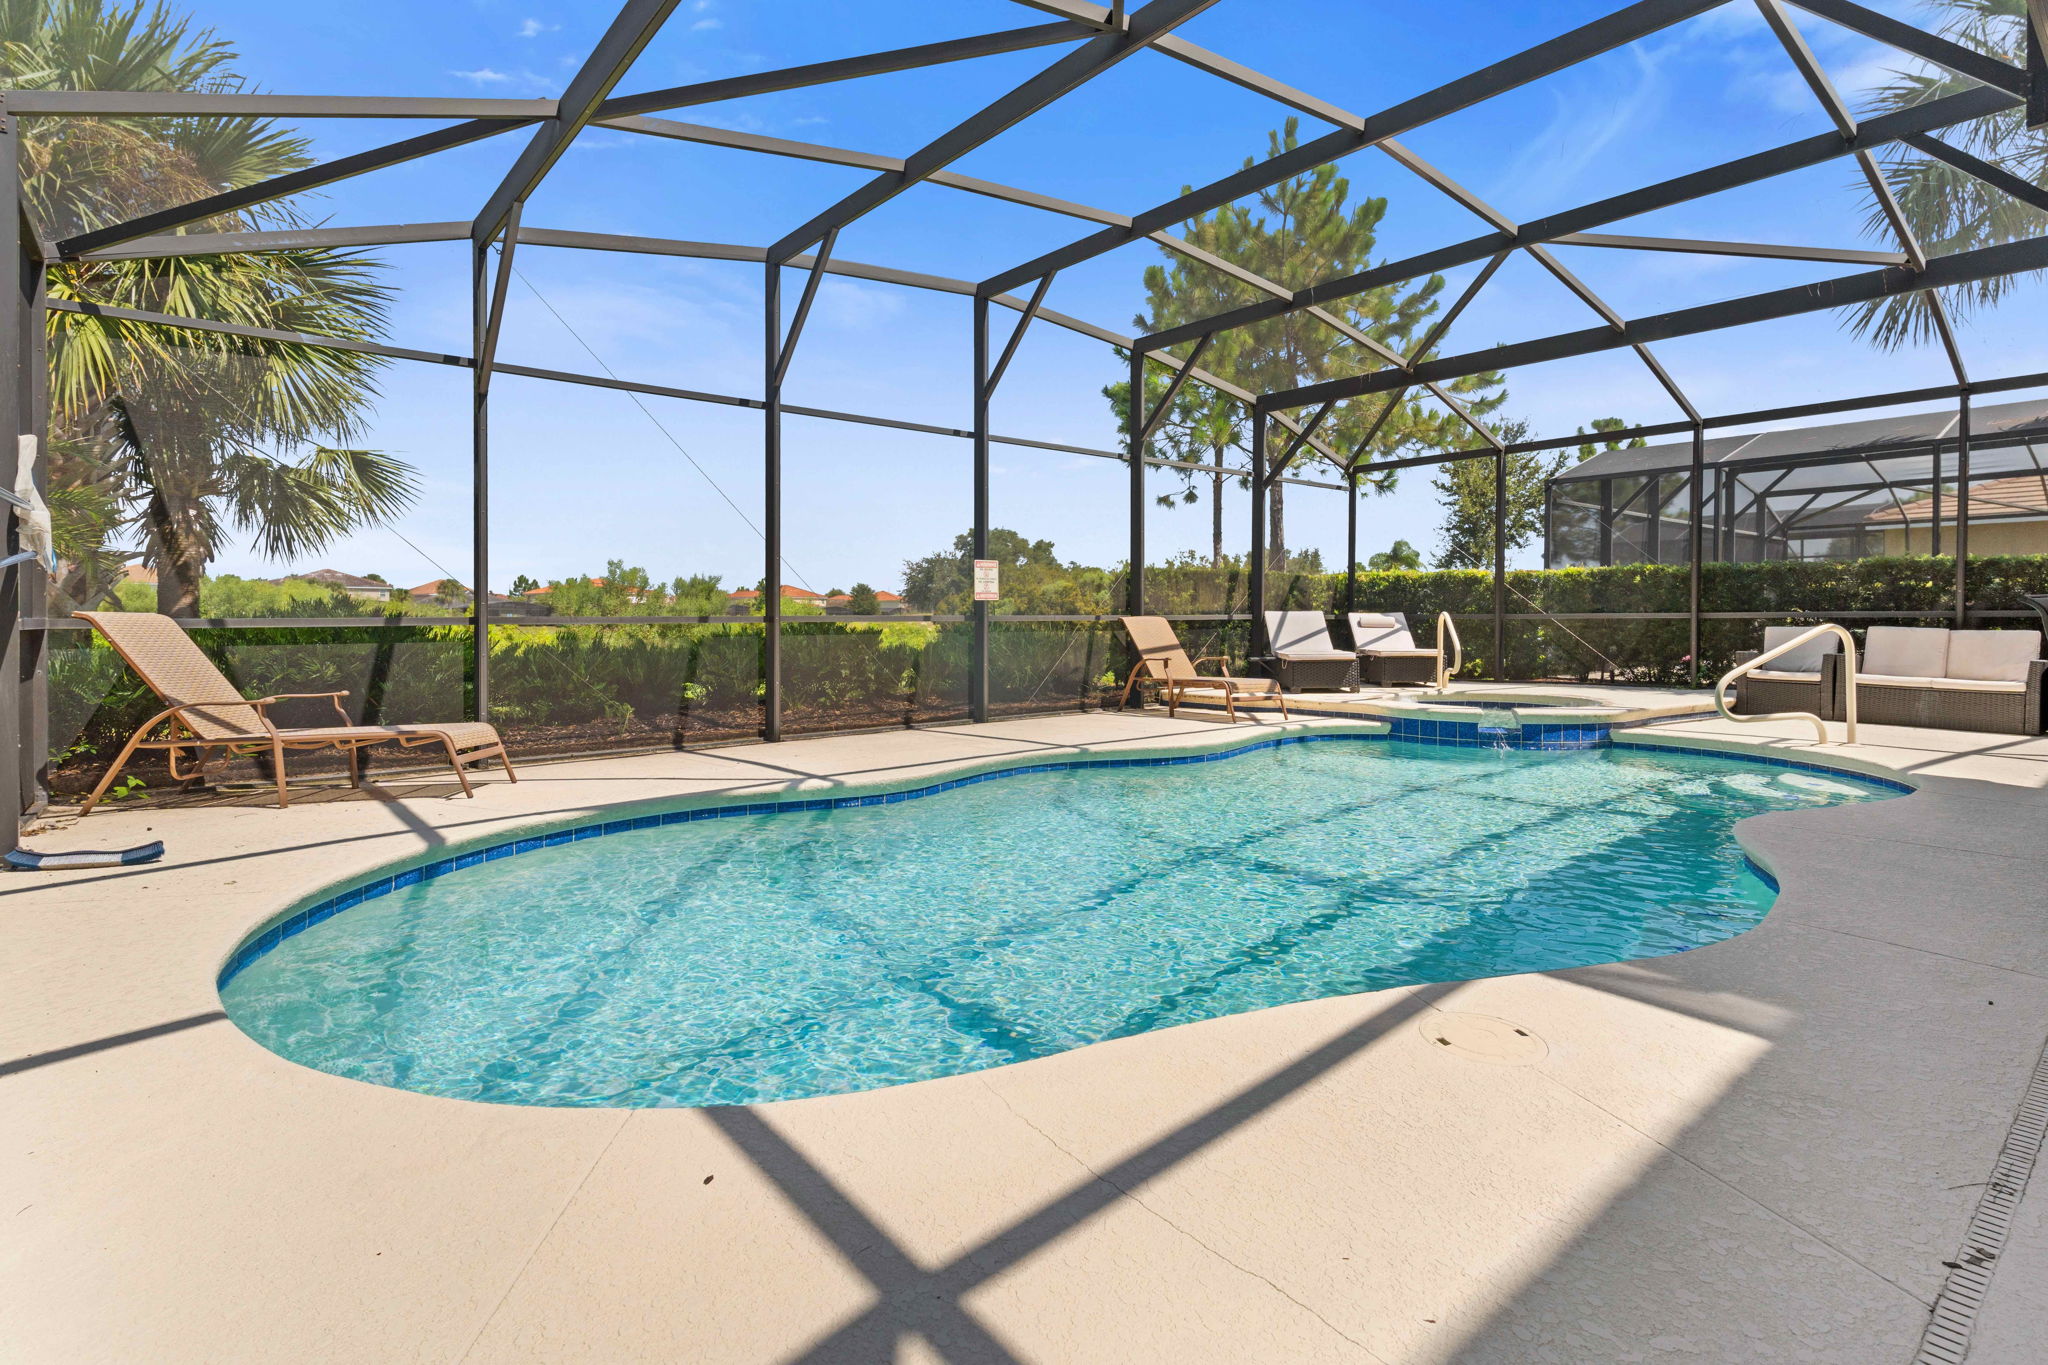 Stunning private pool area of the home in Davenport Florida - Embrace the beauty of outdoor swimming pool - A retreat that sets the stage for a memorable stay - Enjoy leisurely moments in inviting pool area